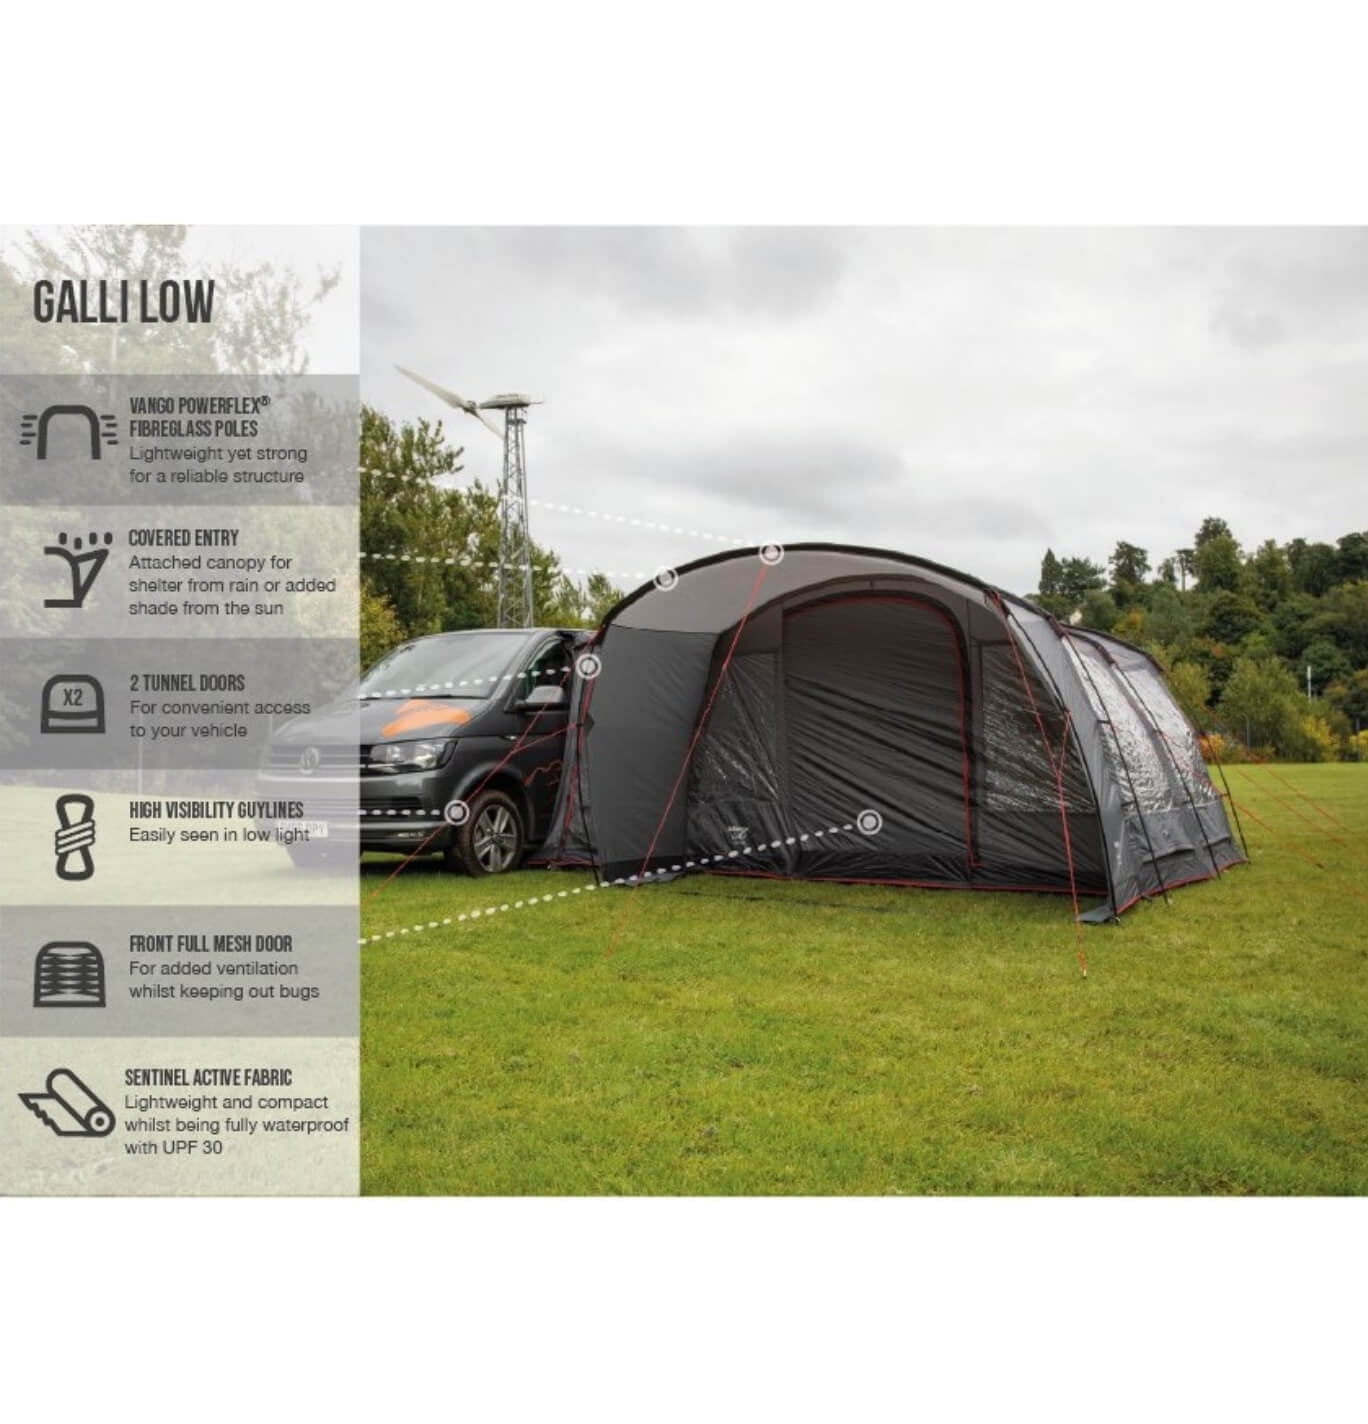 Feature of the Vango Galli poled awning